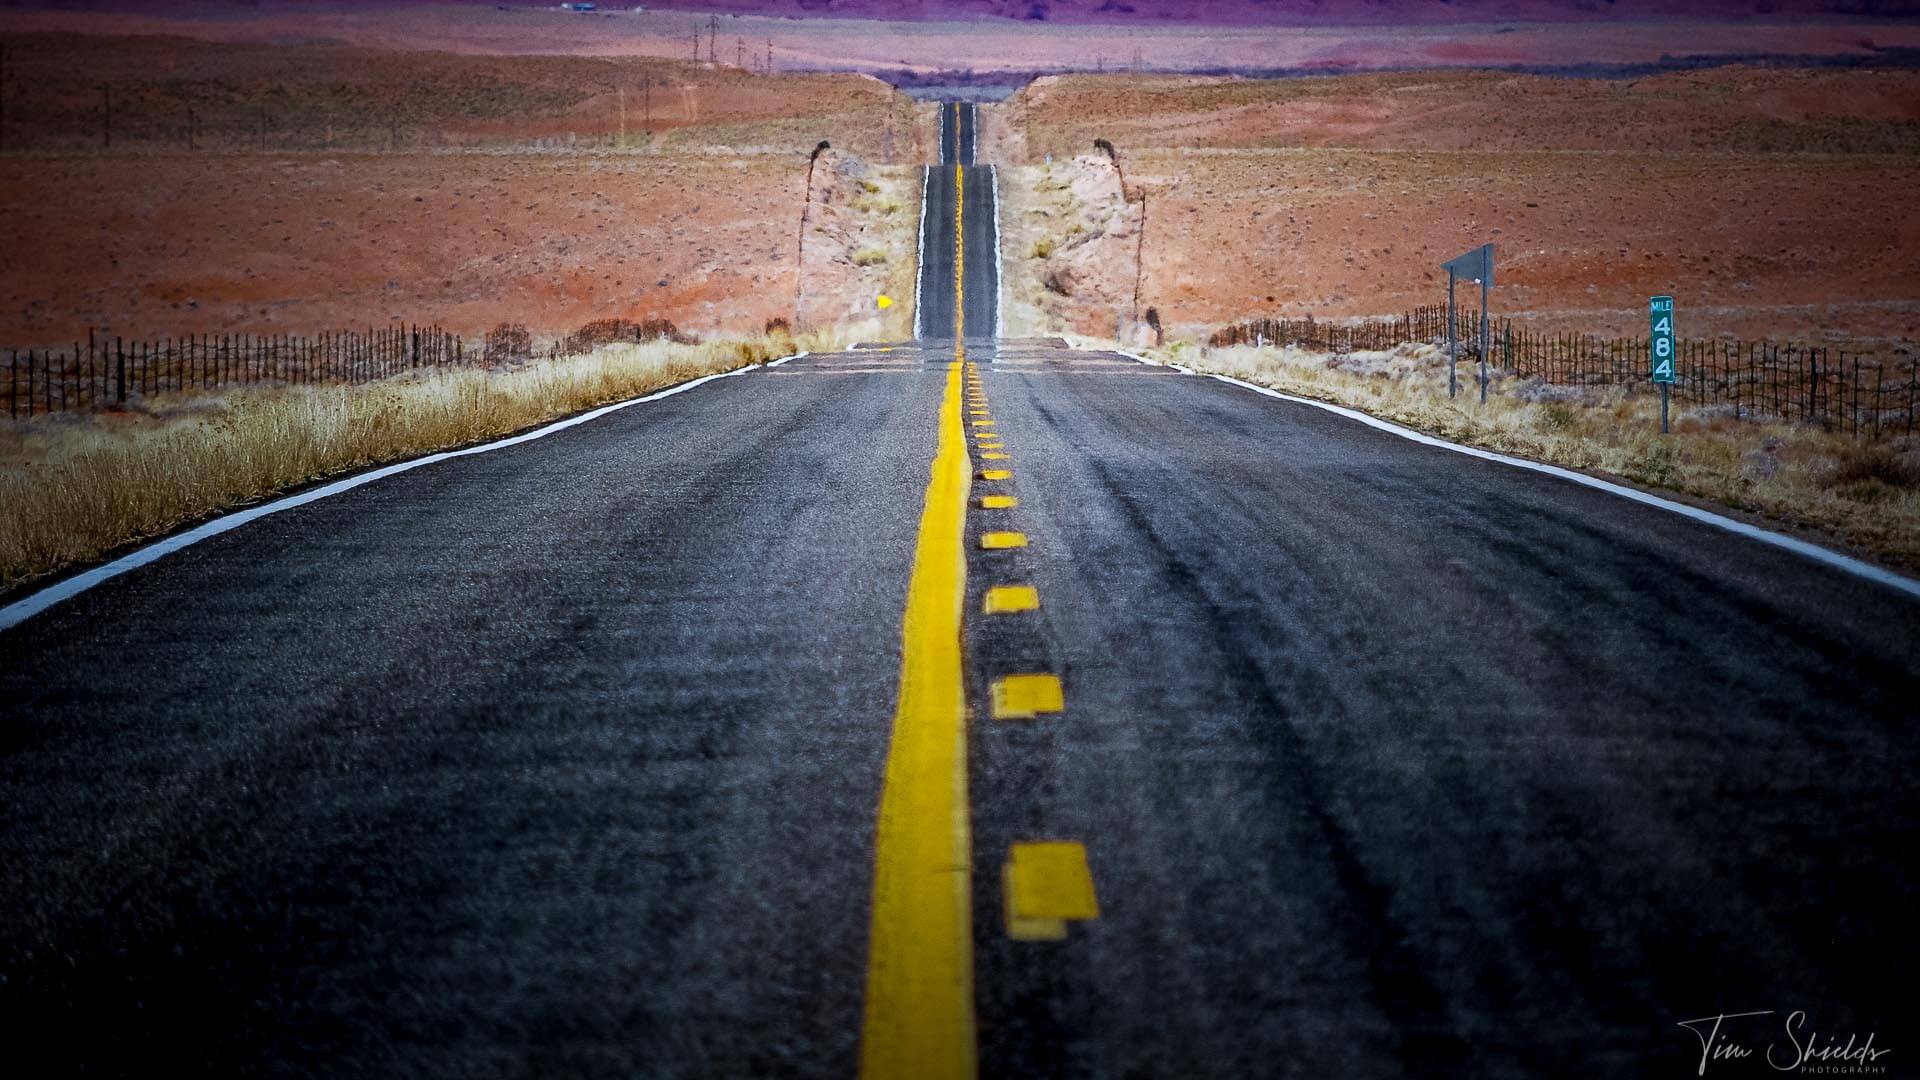 A photo of a long, straight road in Death Valley